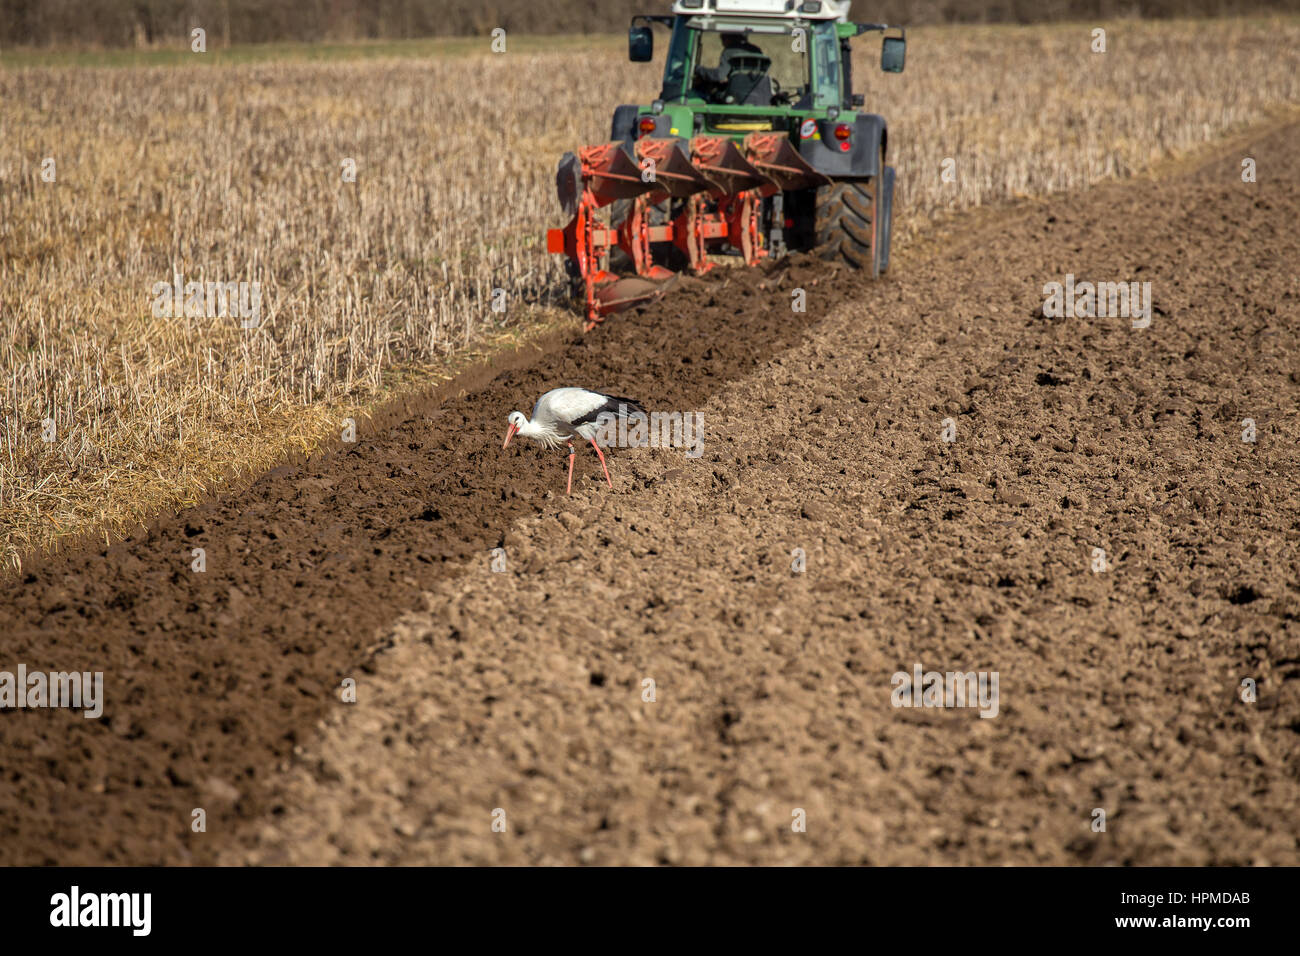 A farmer plows a field with a tractor, this is an opportunity for the storks to find food. Basel, Switzerland. Stock Photo